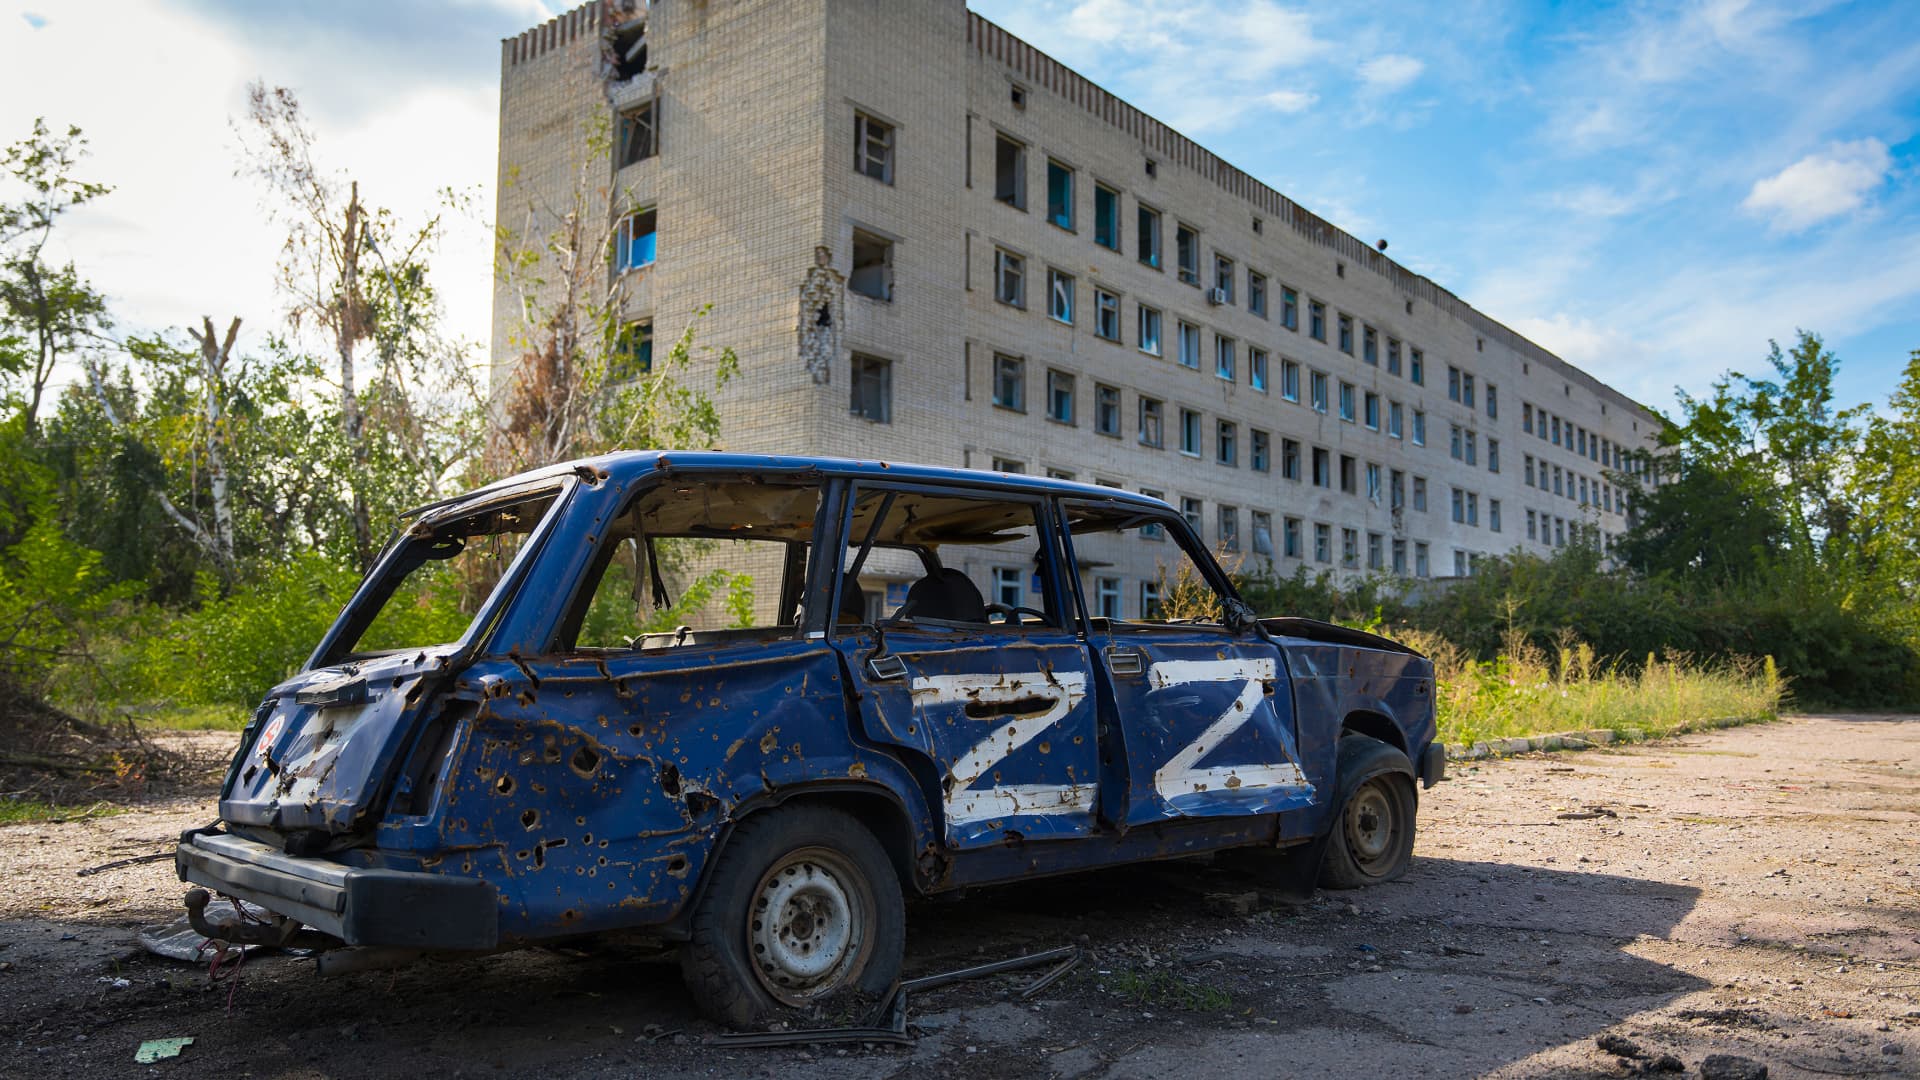 A damaged car, which was carjacked by Russian soldiers, pictured in front of a damaged hospital building on Sept. 27, 2022, in Vysokopillia, Ukraine.